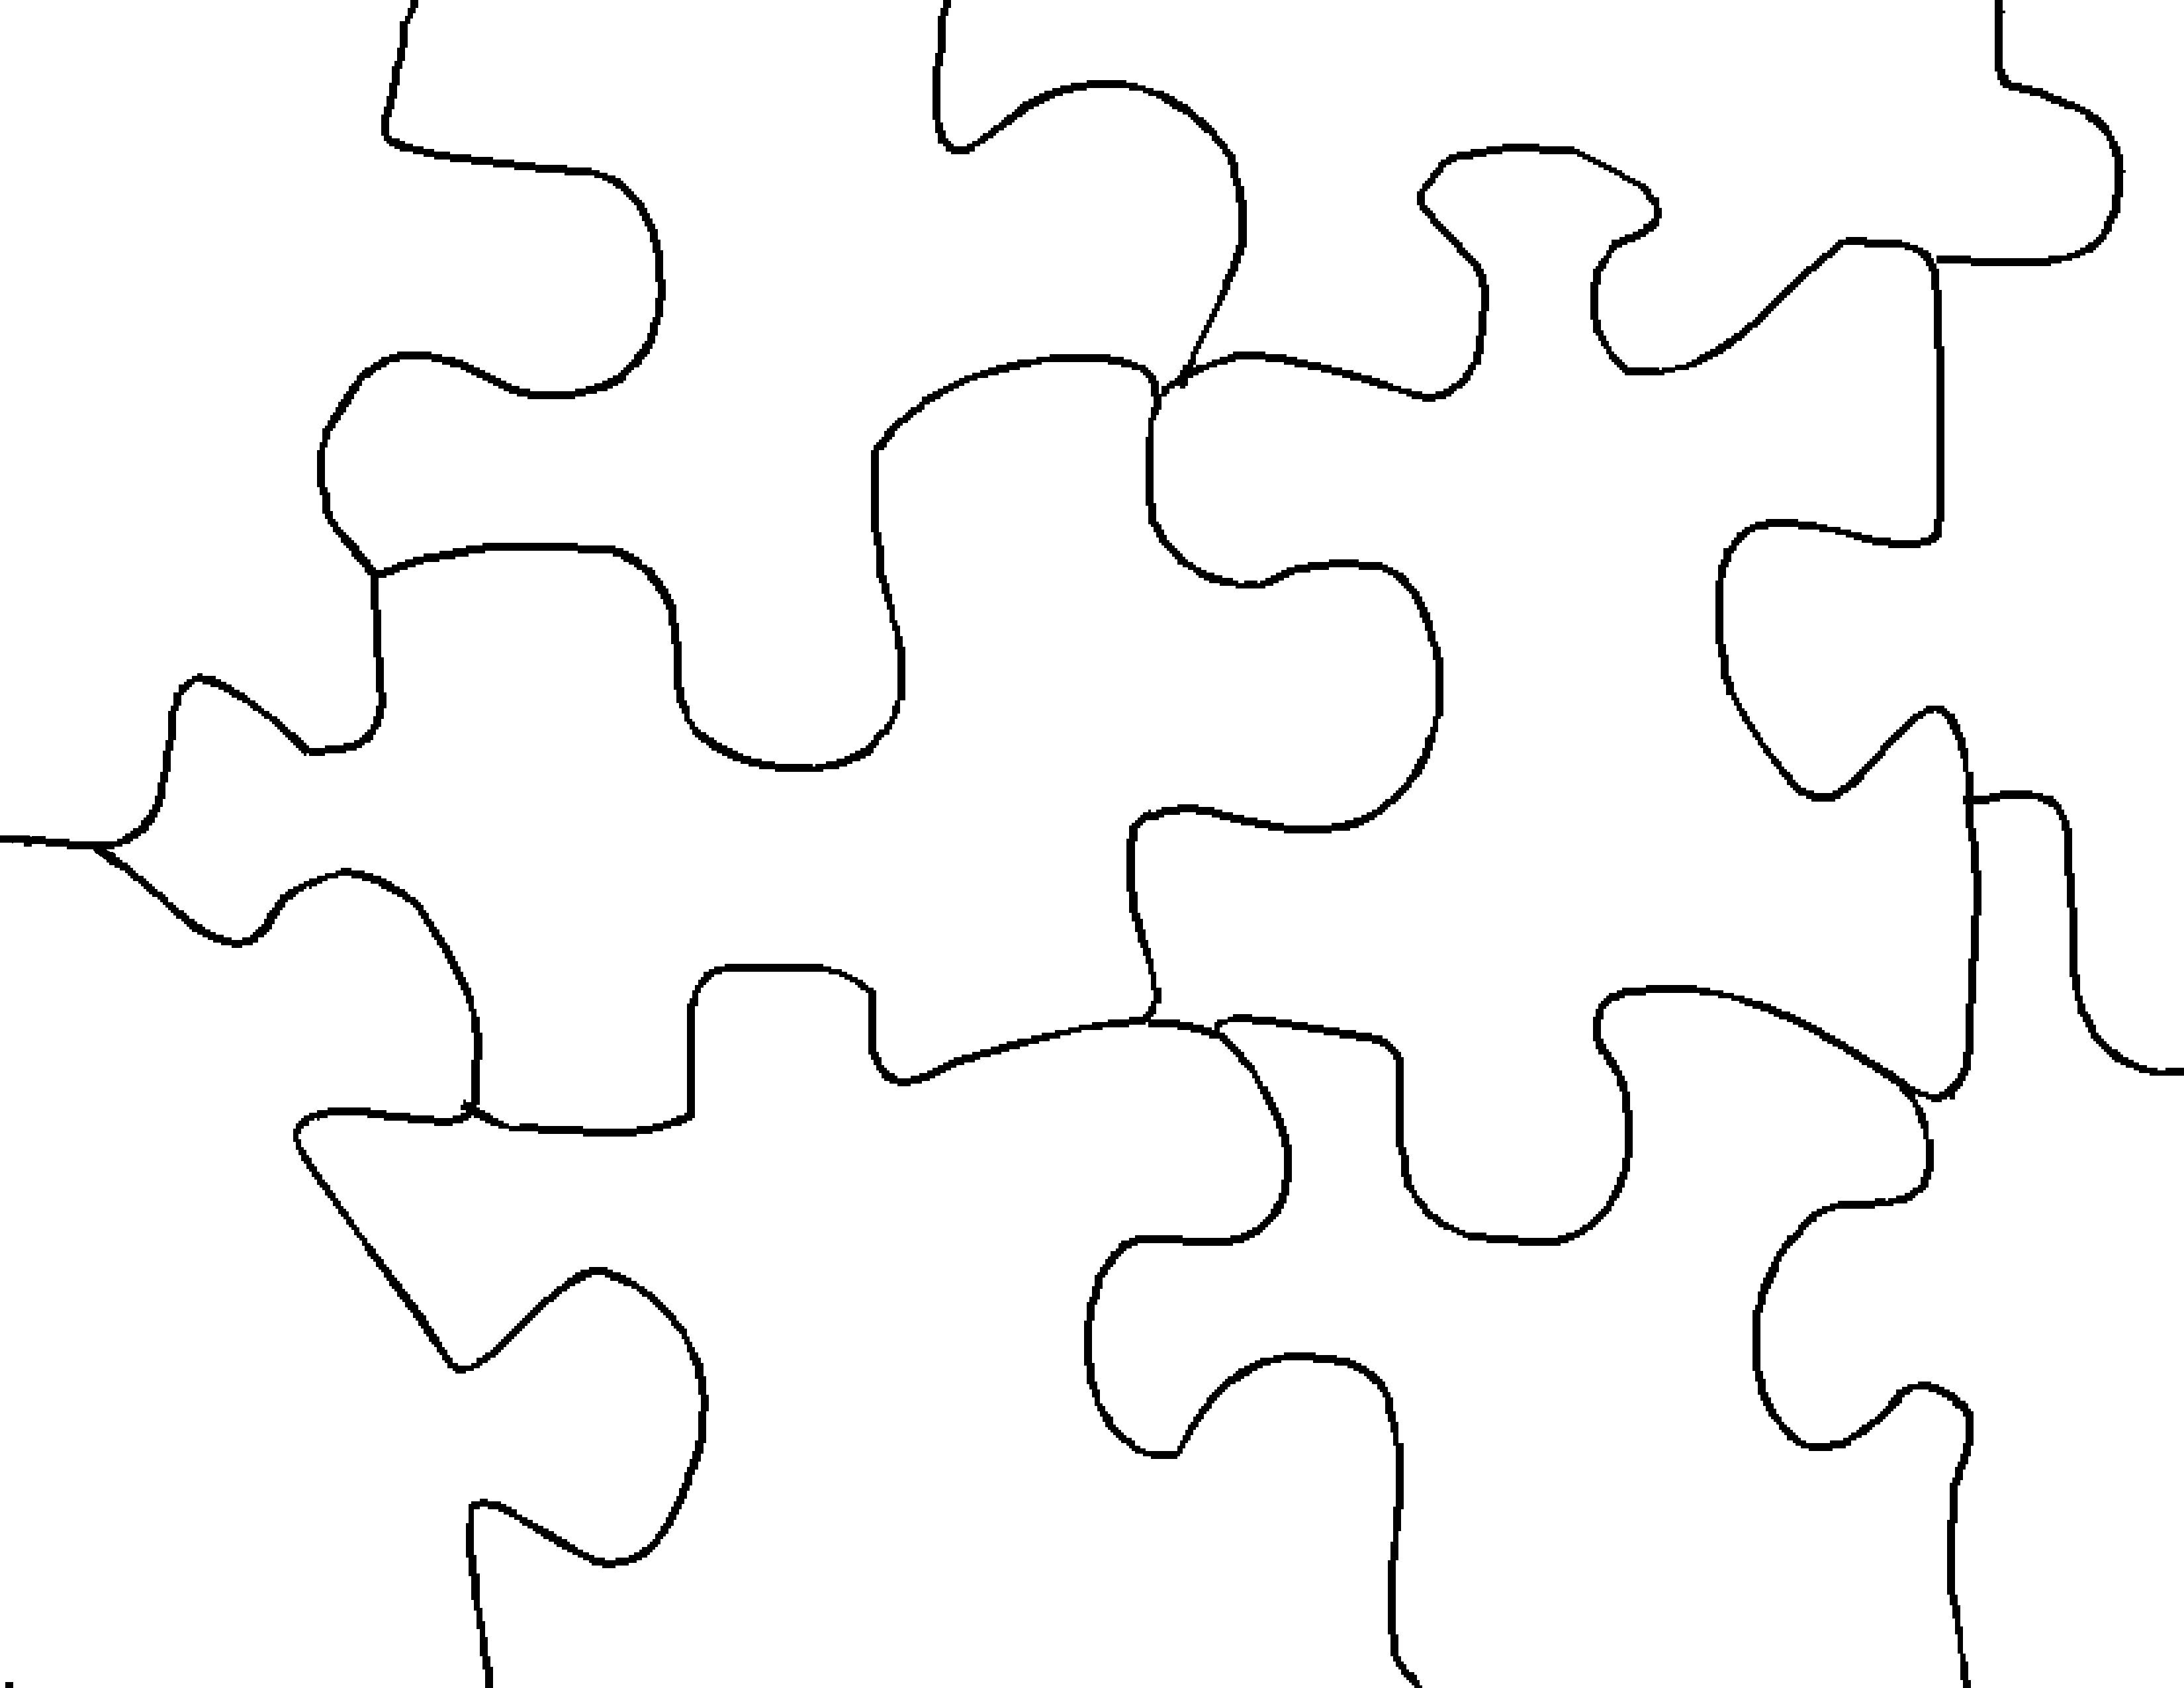 Free Puzzle Template, Download Free Clip Art, Free Clip Art On - 6 Piece Printable Puzzle